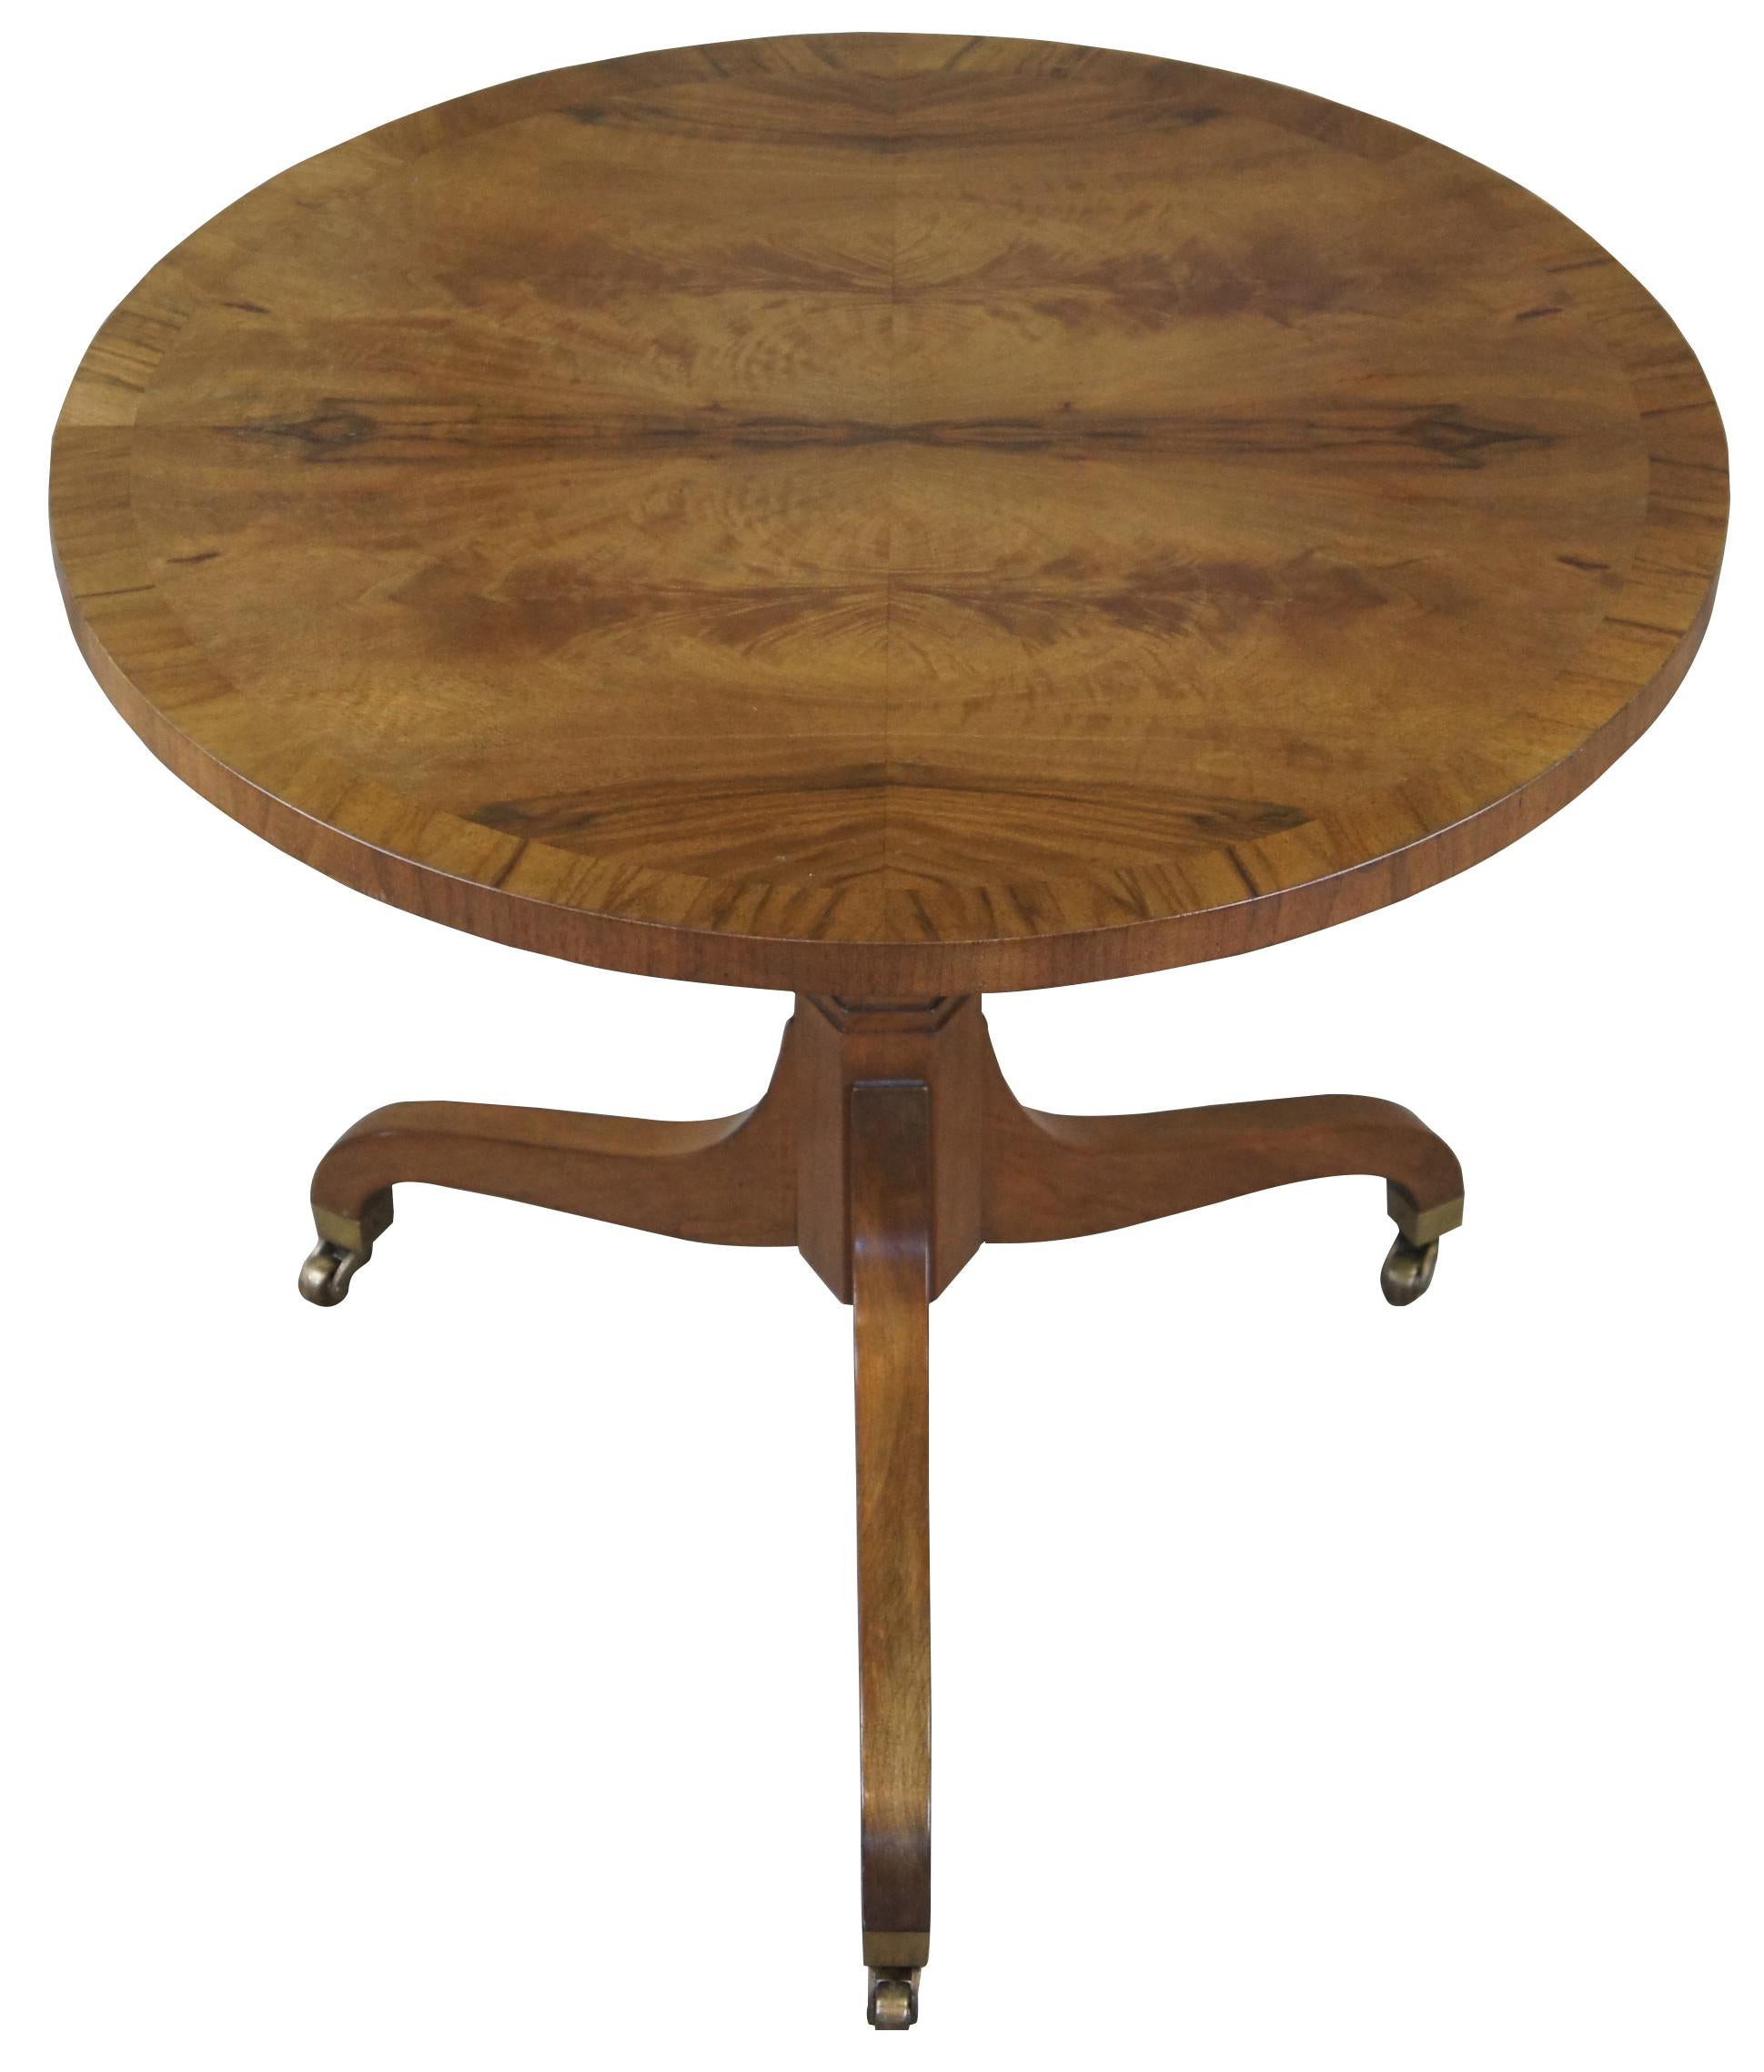 Baker Furniture Regency style side table, Circa 1970s. Made from walnut with a banded and bookmatched veneered top, supported by a hexagonal turned center support over tripod base with curved legs featuring brass caps and casters. Marked along